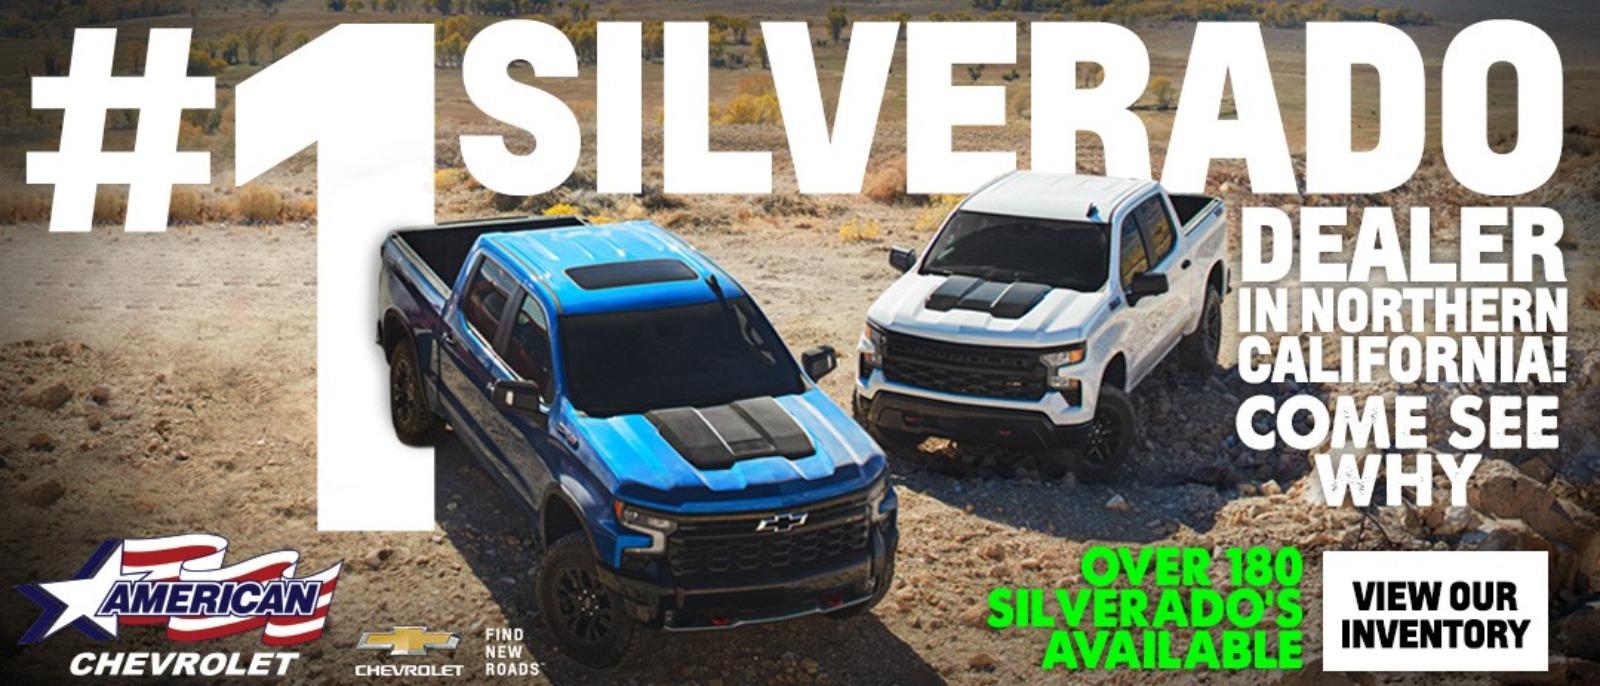 TOP SELLING SILVERADO DEALER IN THE REGION. COME SEE WHY !